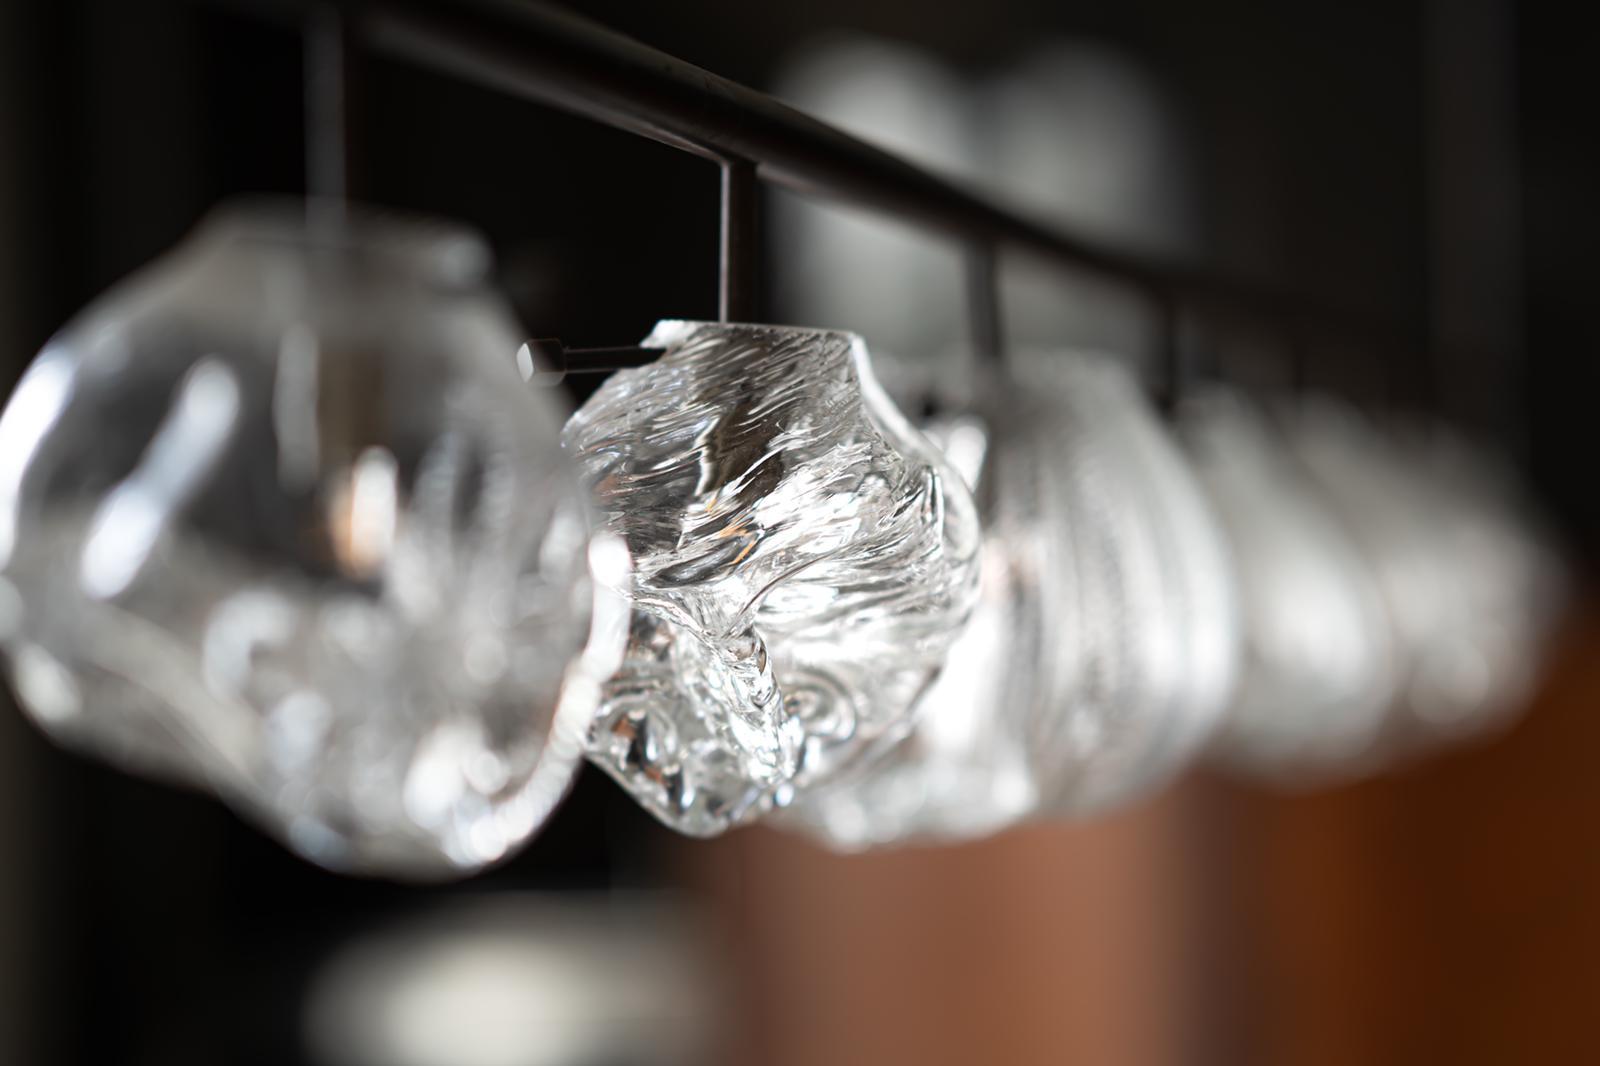 Clear pendant lamp by Sema Topaloglu

This product is hand-crafted therefore each production is unique and might not be exactly the same as the visual.

Sema Topaloglu Studio is known for the original designs of interiors, sculptures, and